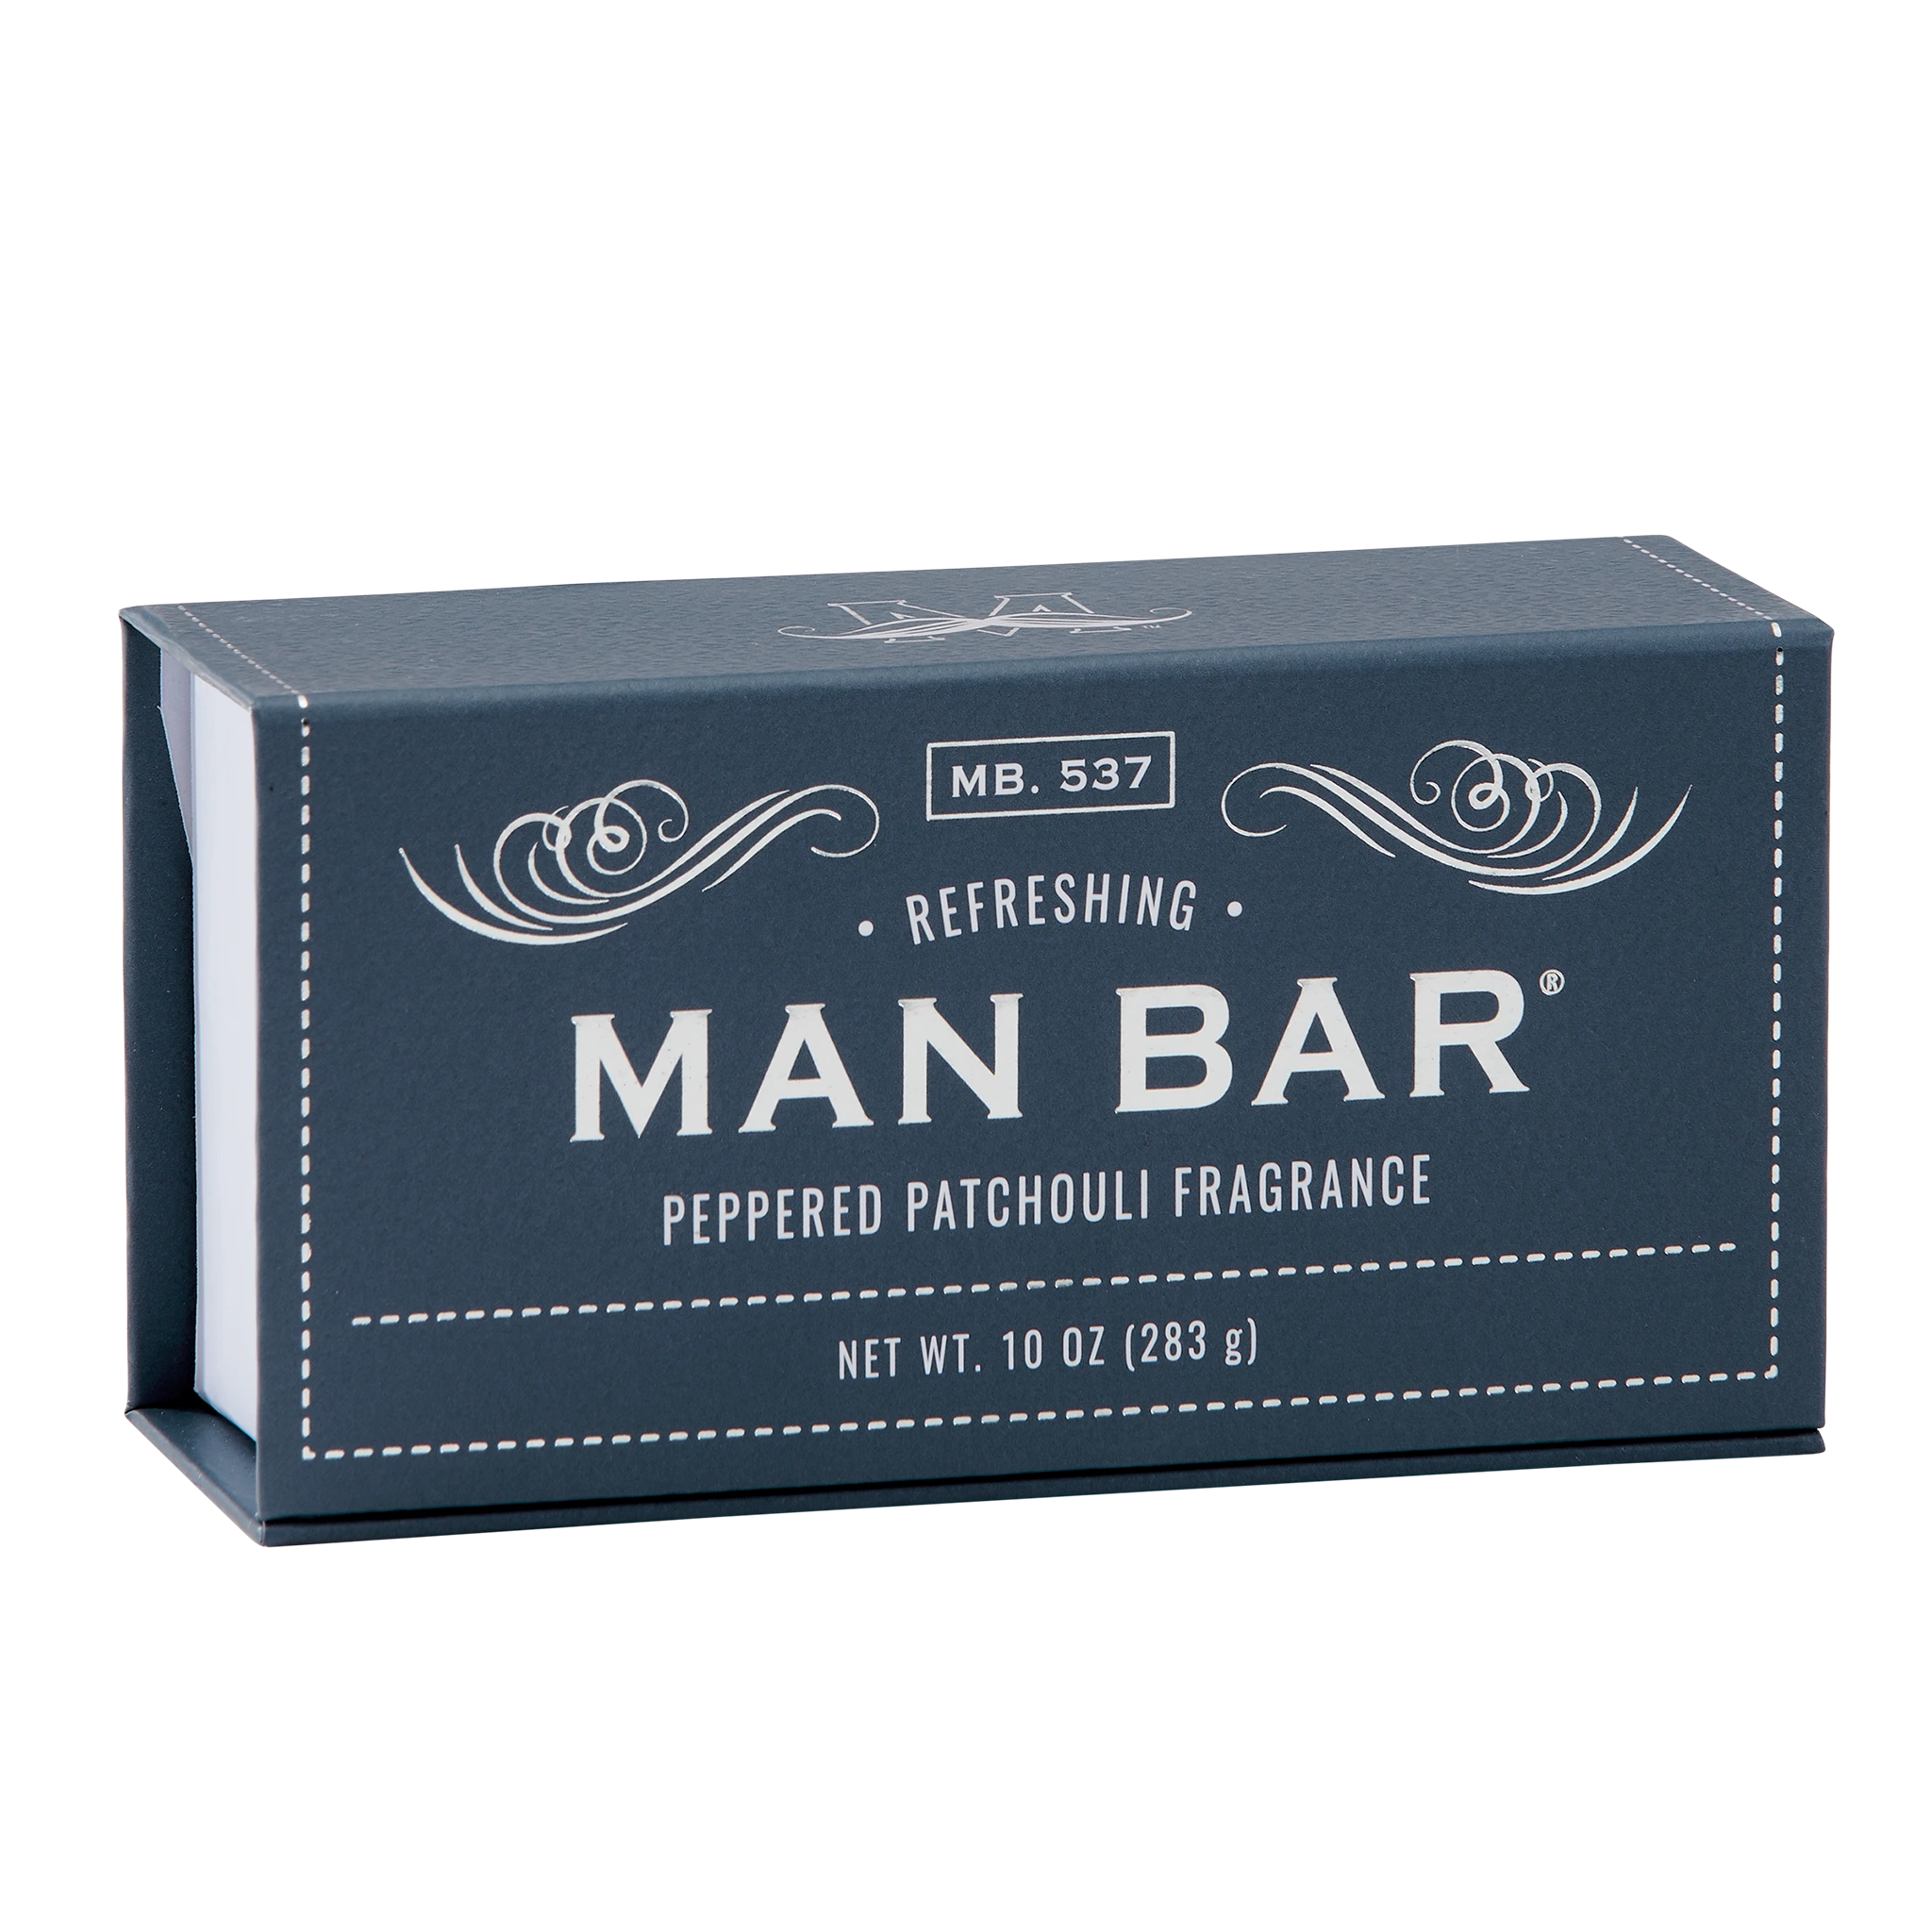 Man Bar Refreshing Peppered Patchouli soap box